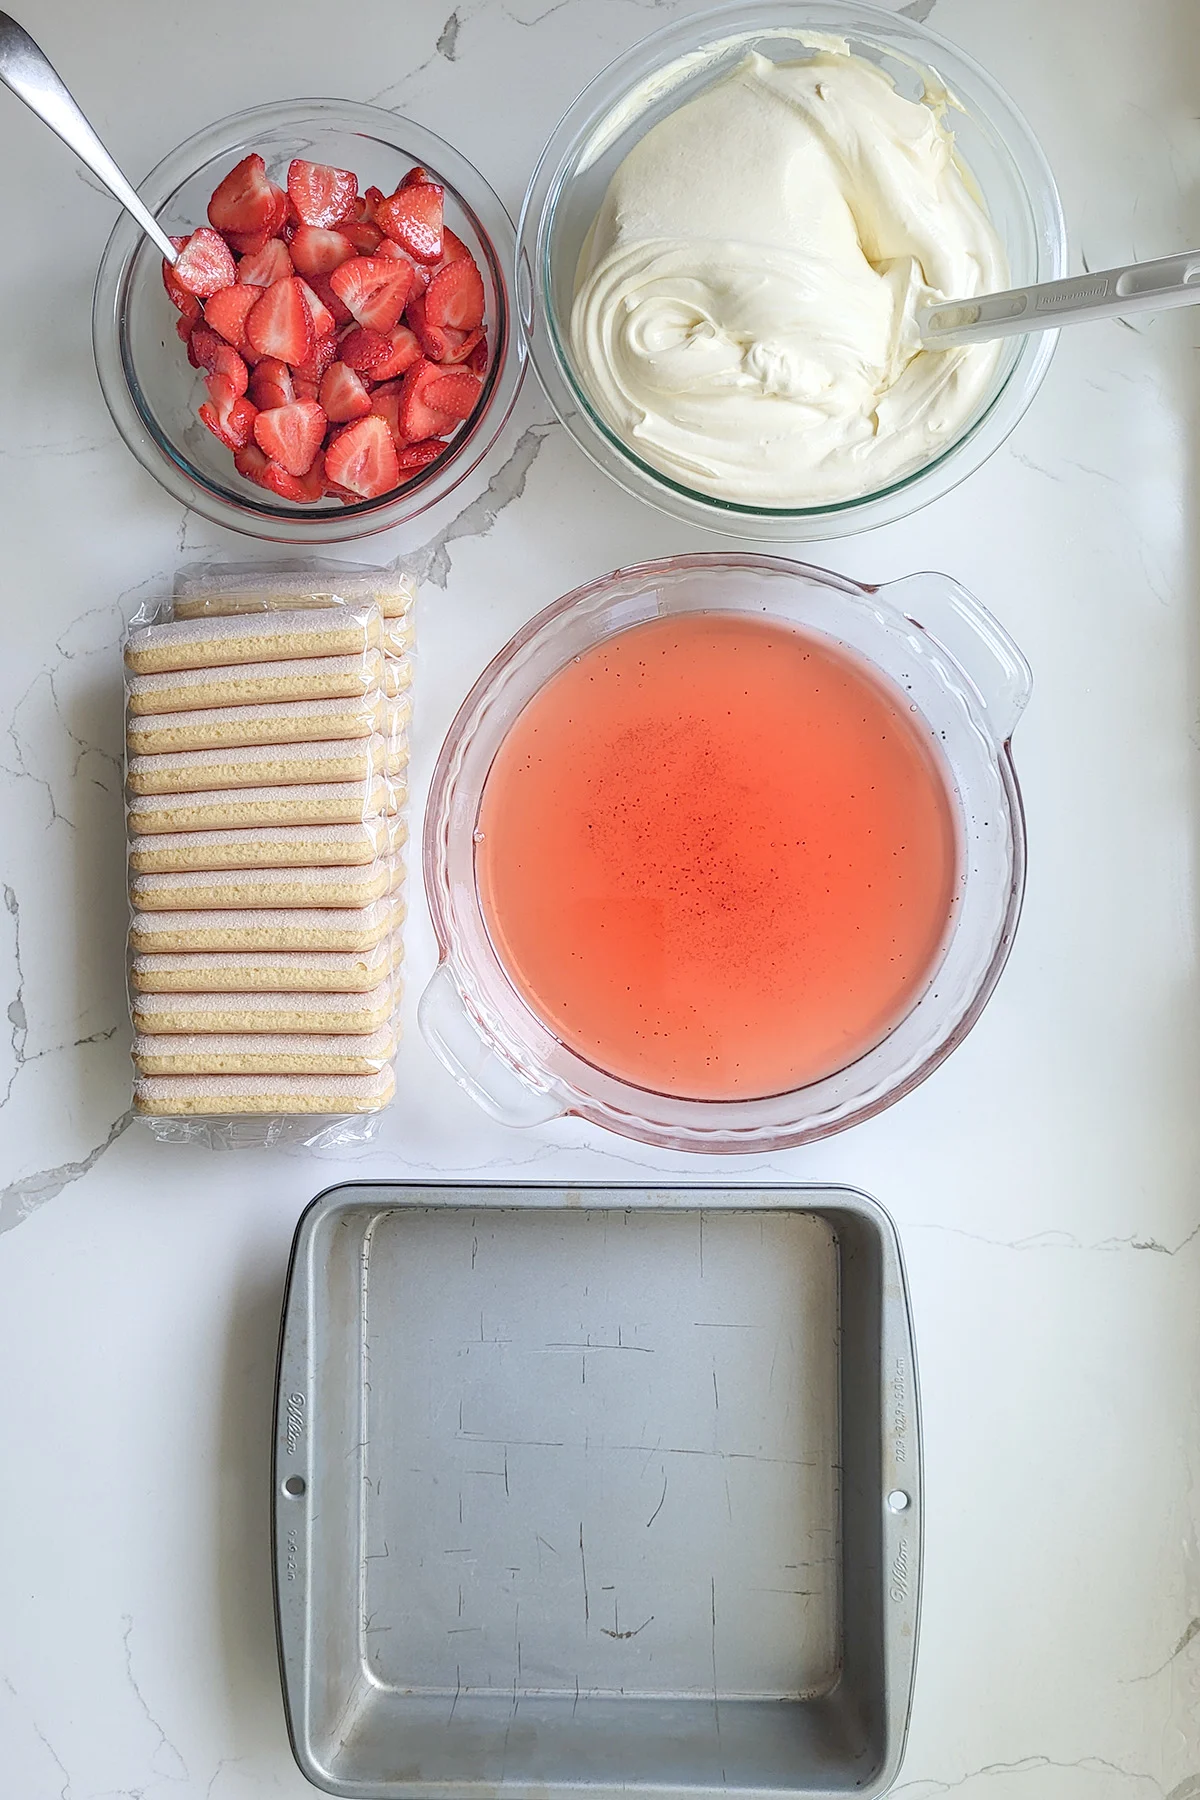 A square pan, a package of cookies, a bowl of syrup, a bowl of cream and a bowl of strawberries.